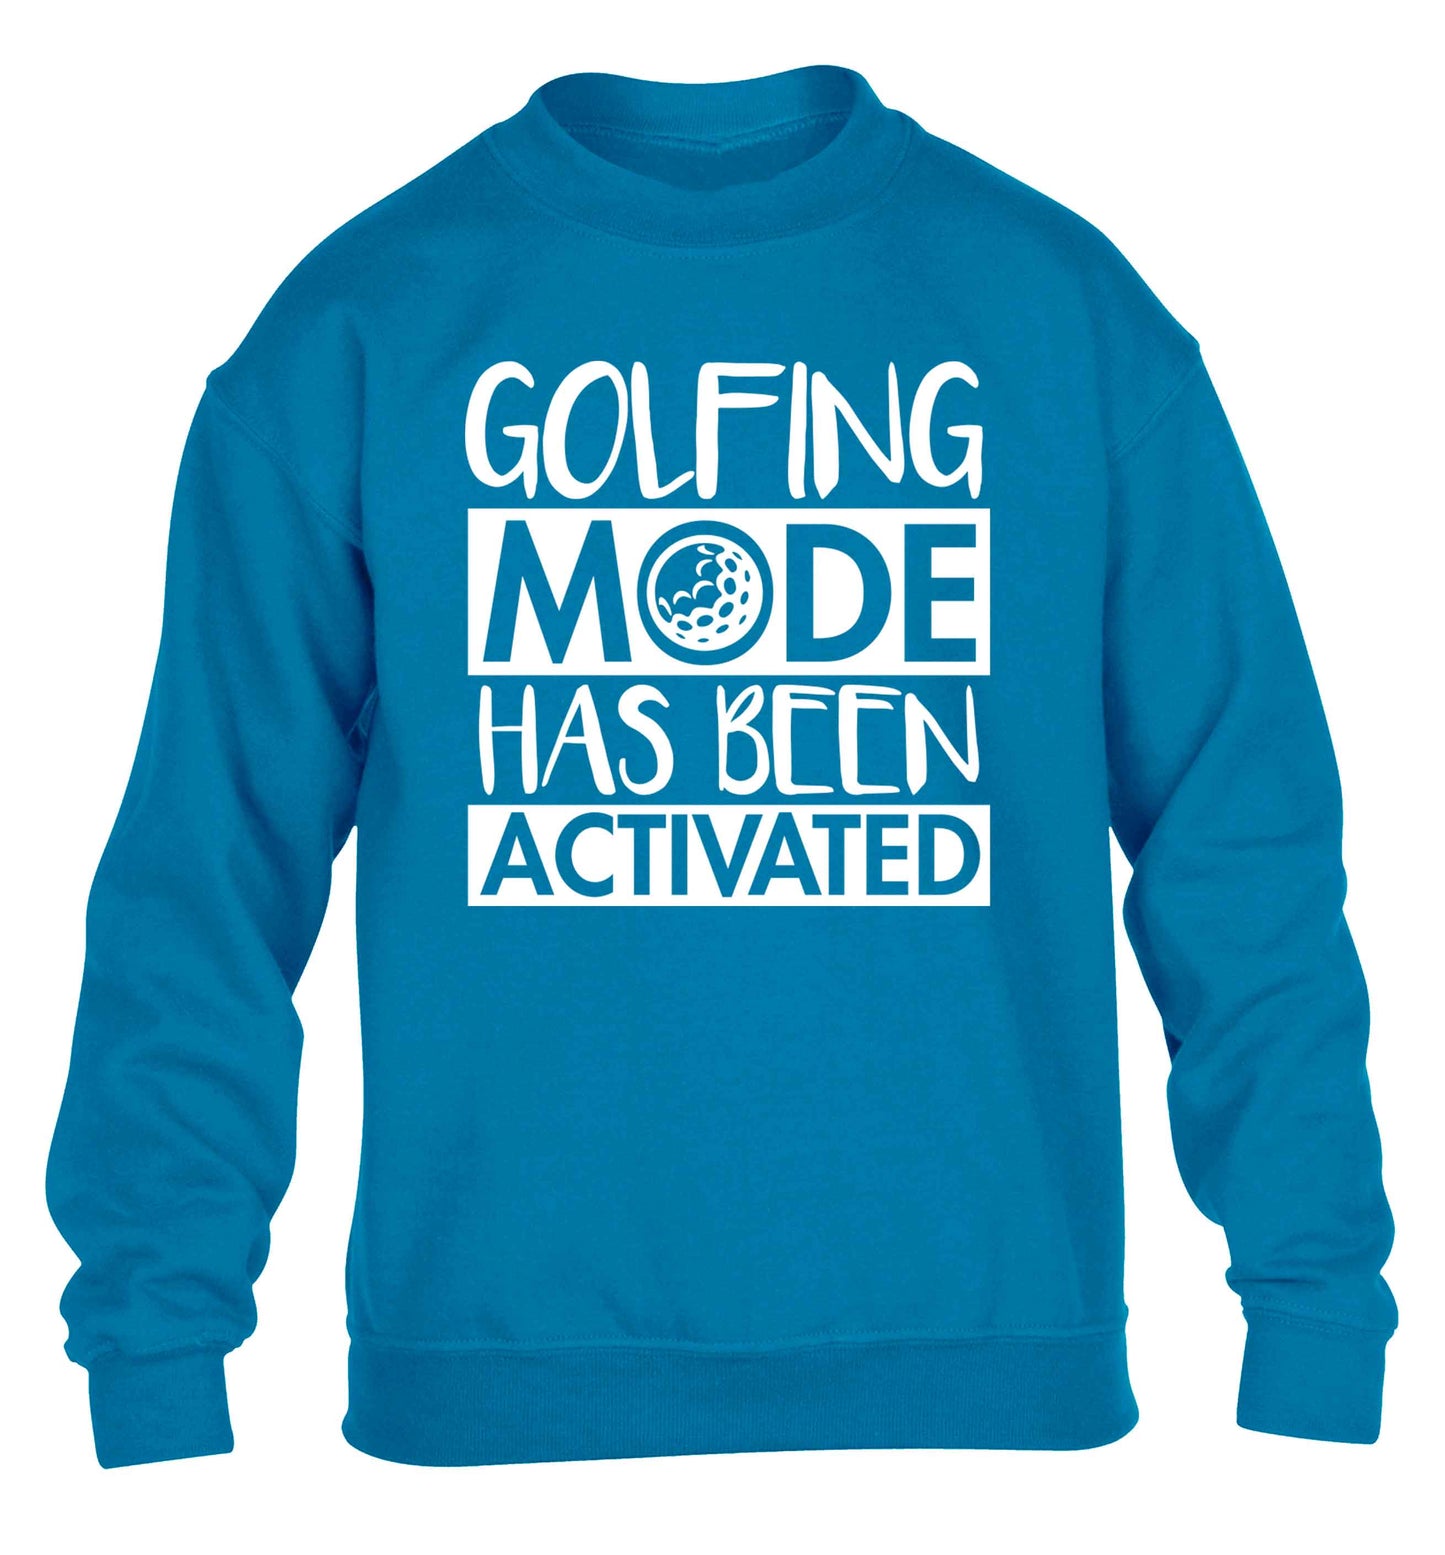 Golfing mode has been activated children's blue sweater 12-13 Years